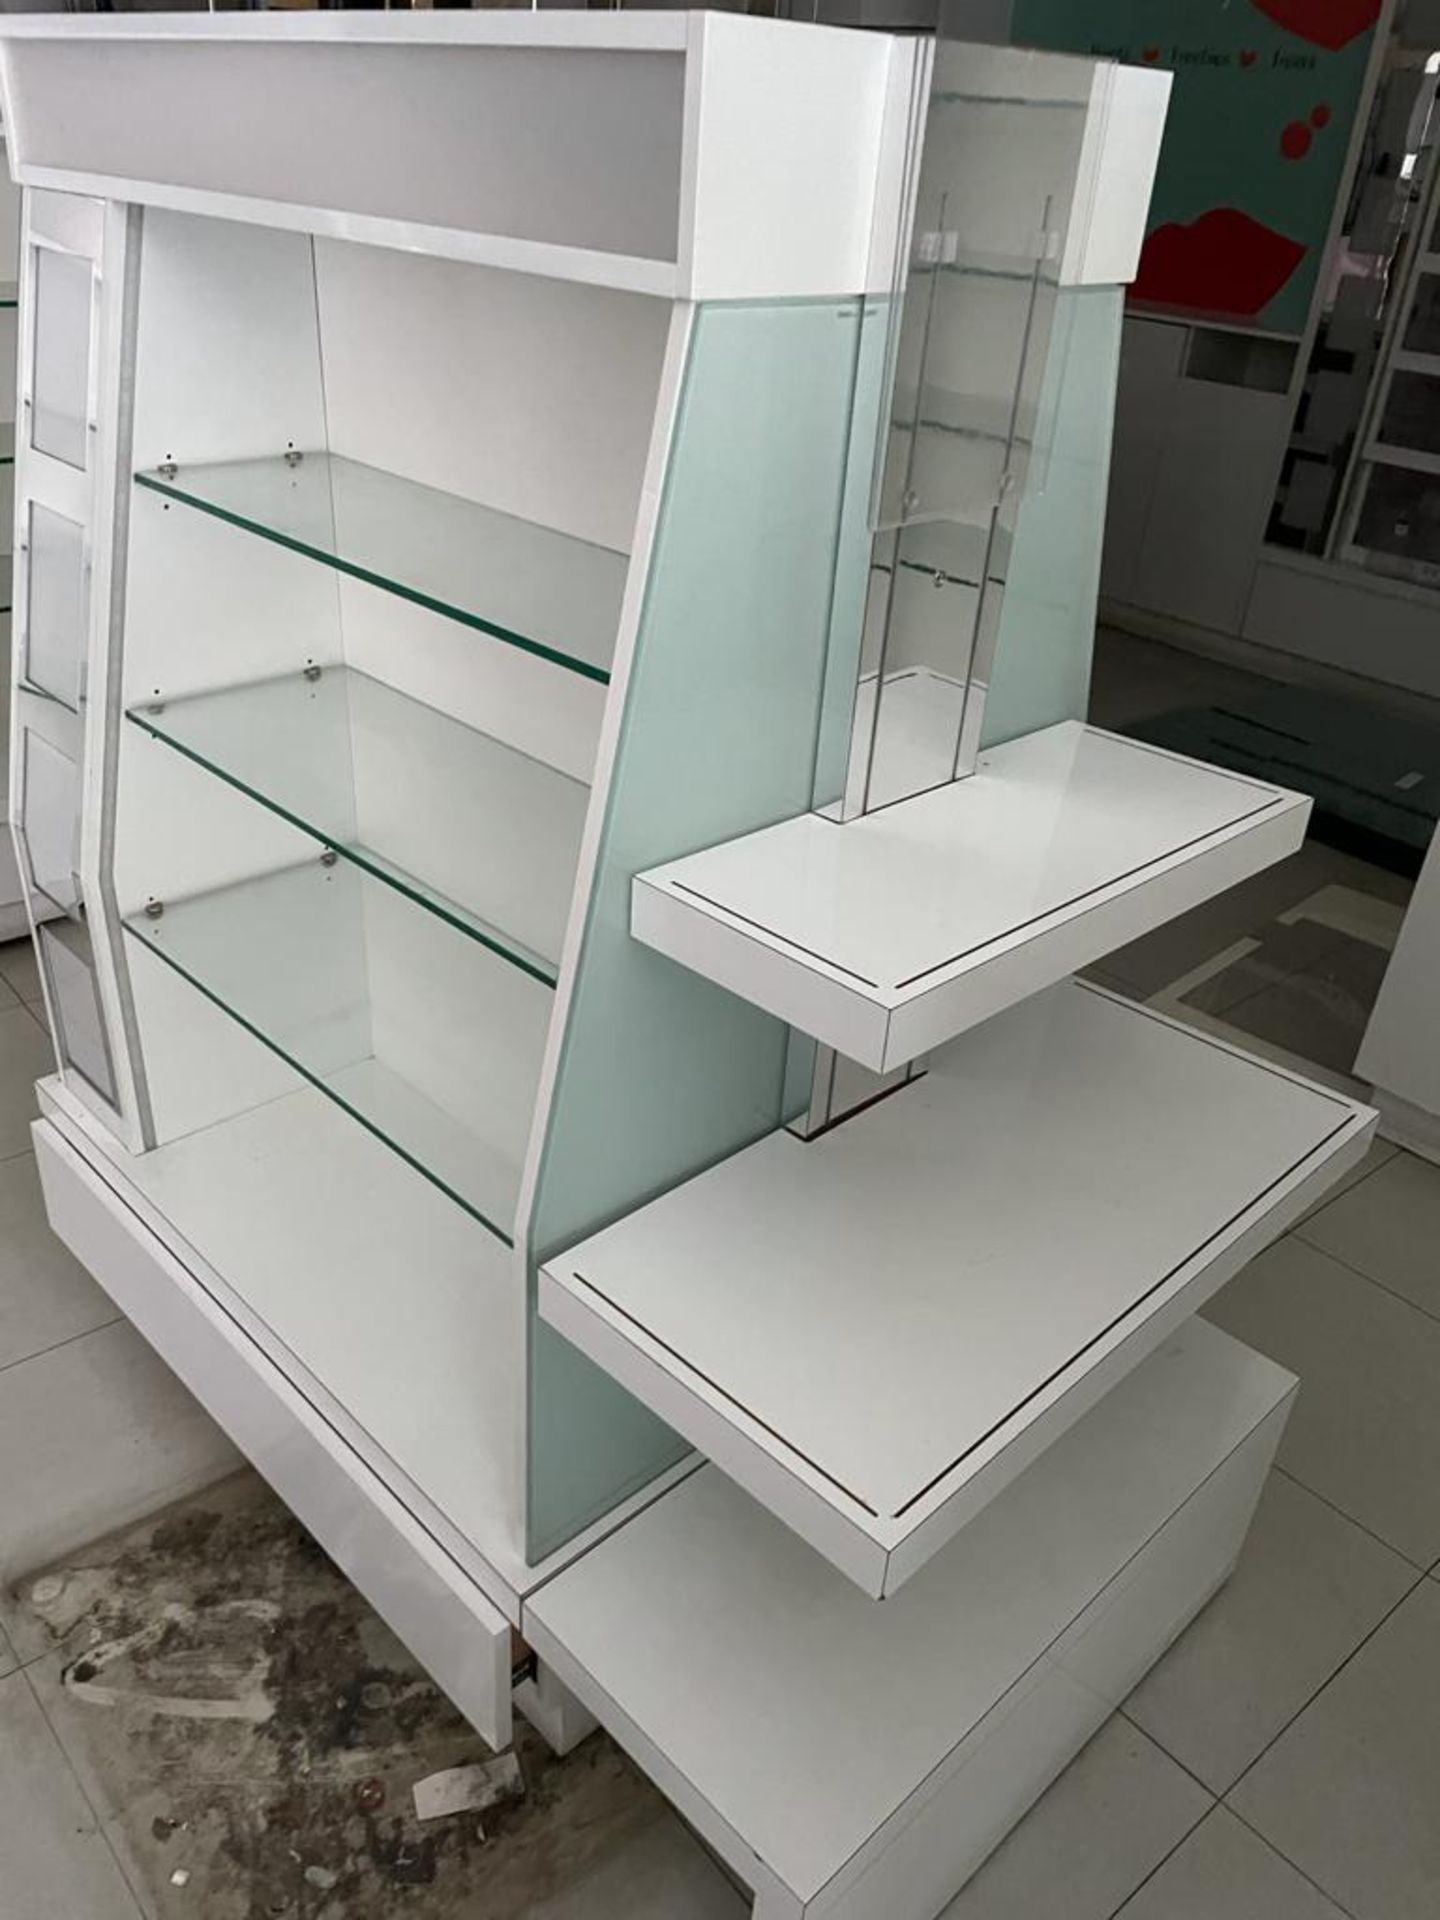 1 x Retail Display Island With Glass Shelves, Illuminated Light Boxes, Mirrors, Storage Drawer and